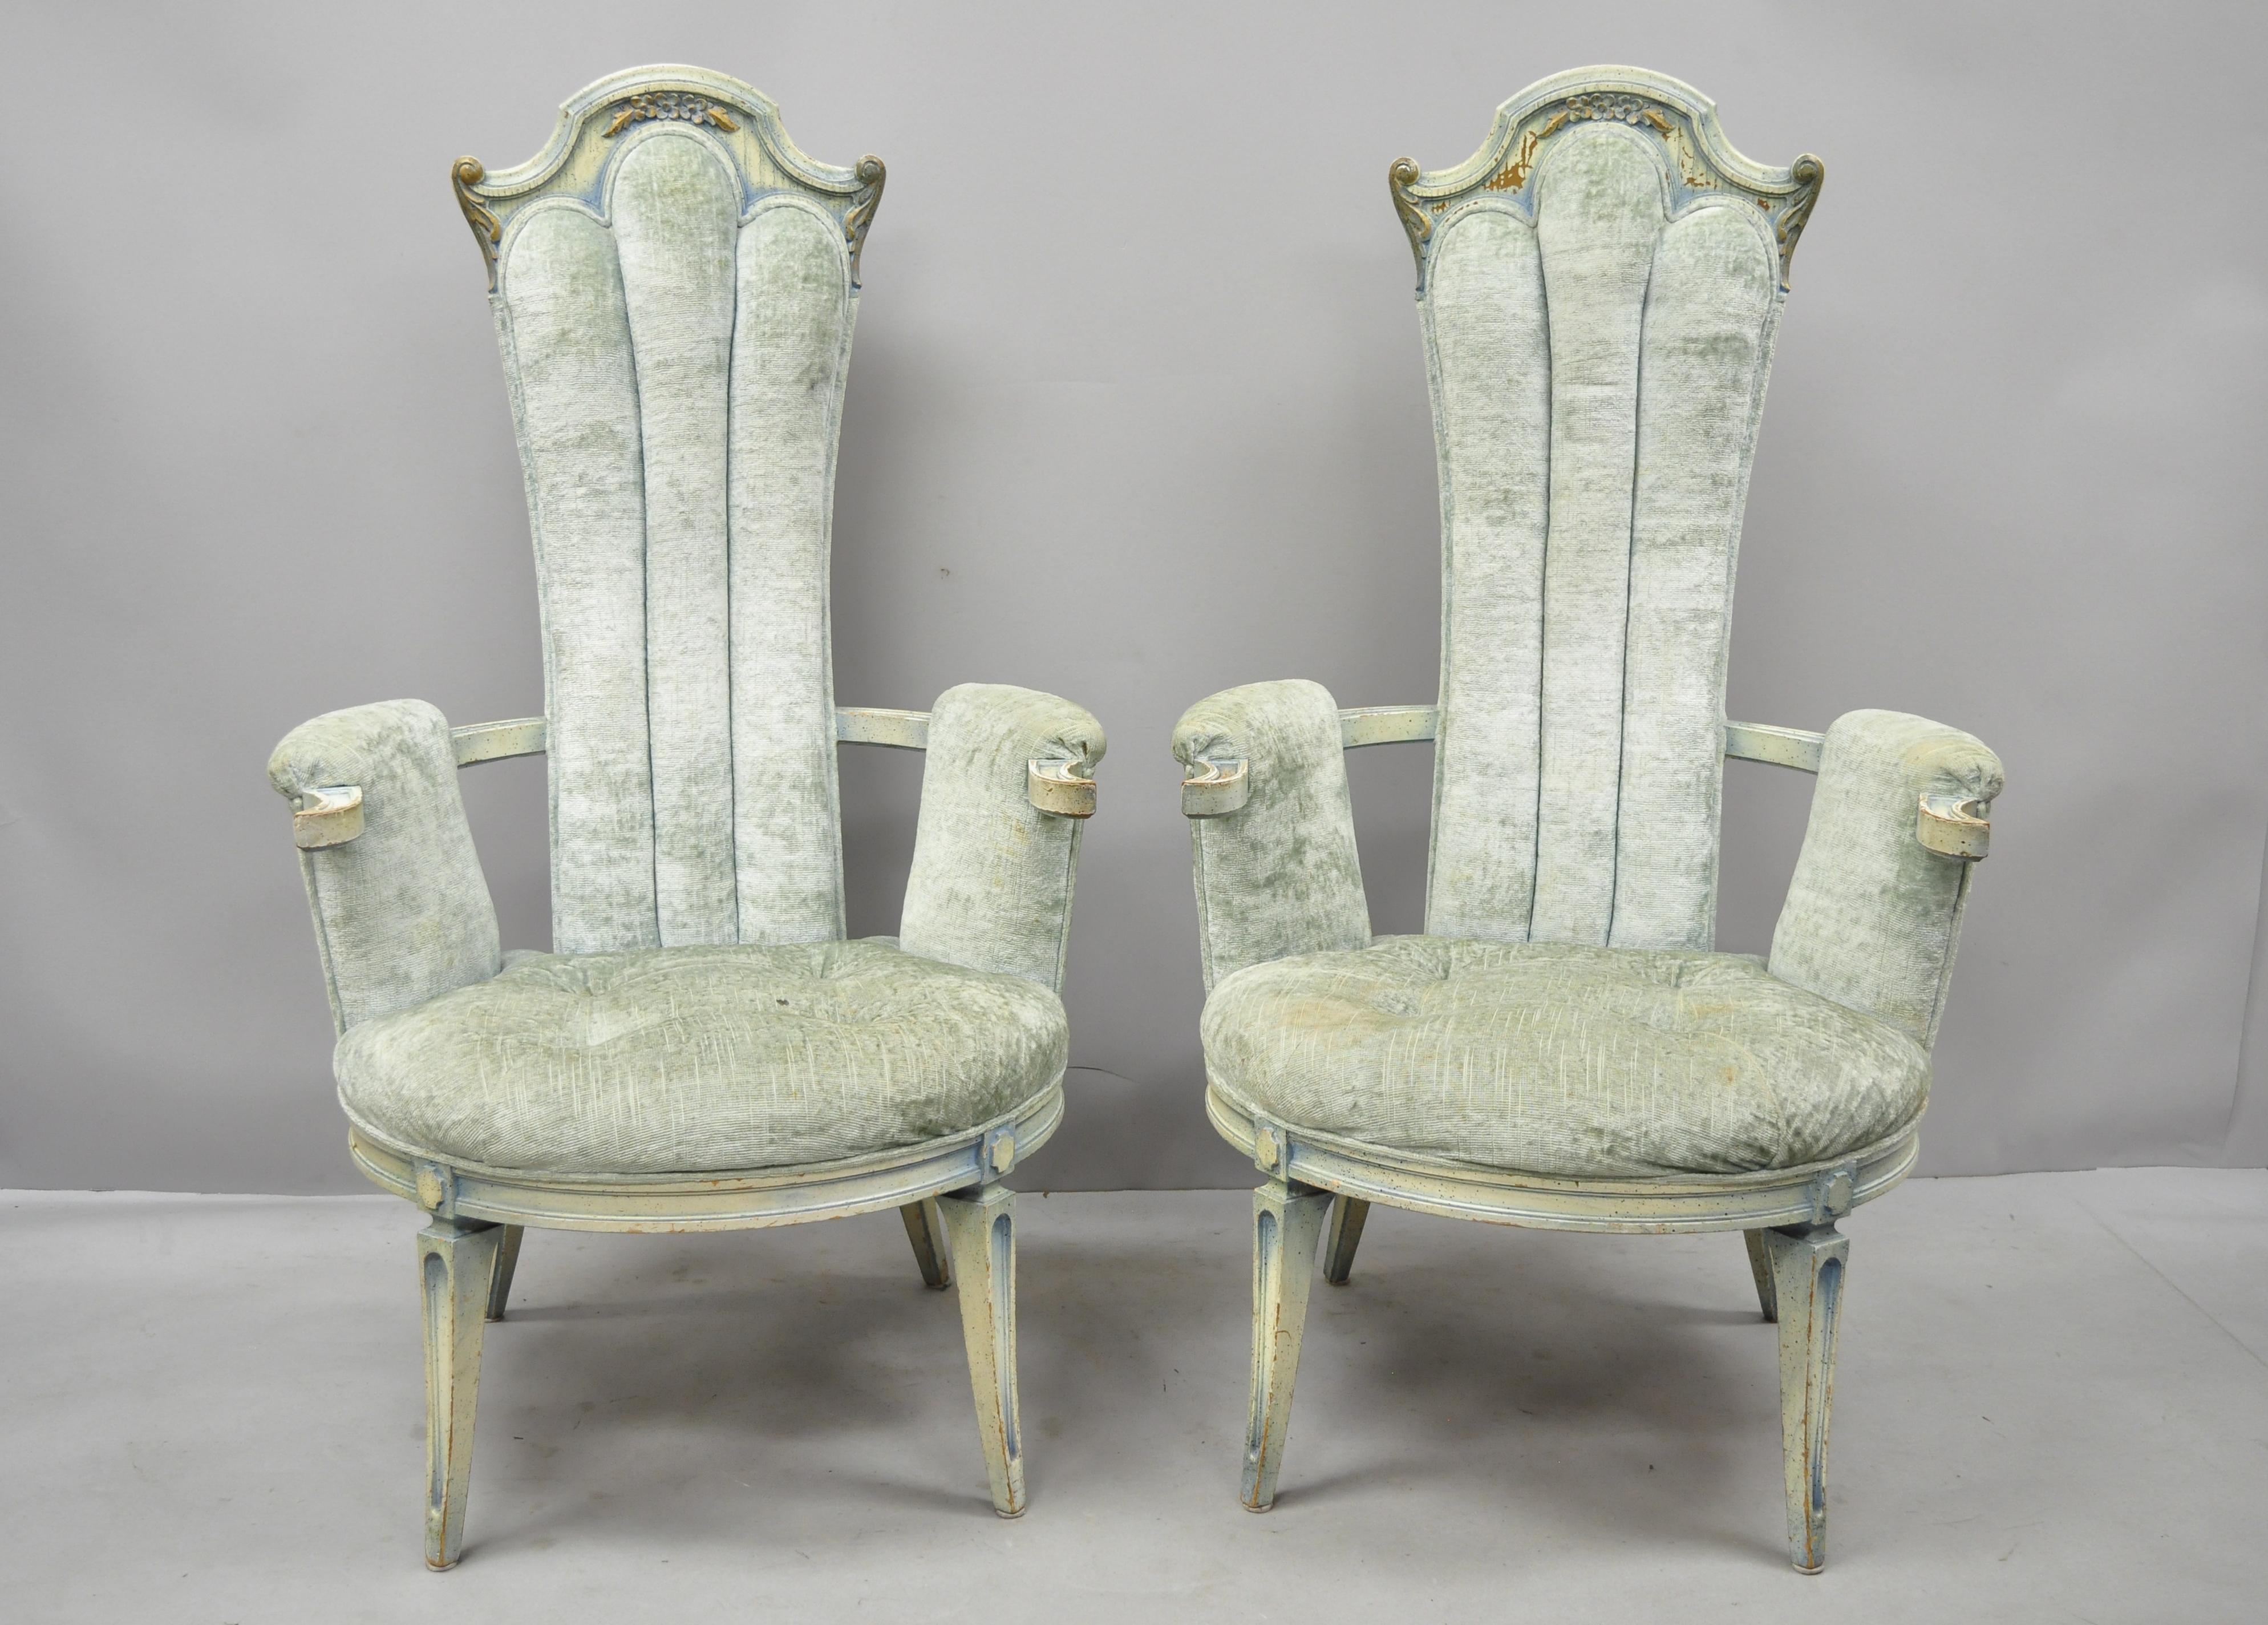 Pair of vintage high back Hollywood Regency style blue painted fireside armchairs. Items feature tall carved backs, blue distressed painted finish, solid wood construction, nicely carved details, quality American craftsmanship, sleek sculptural